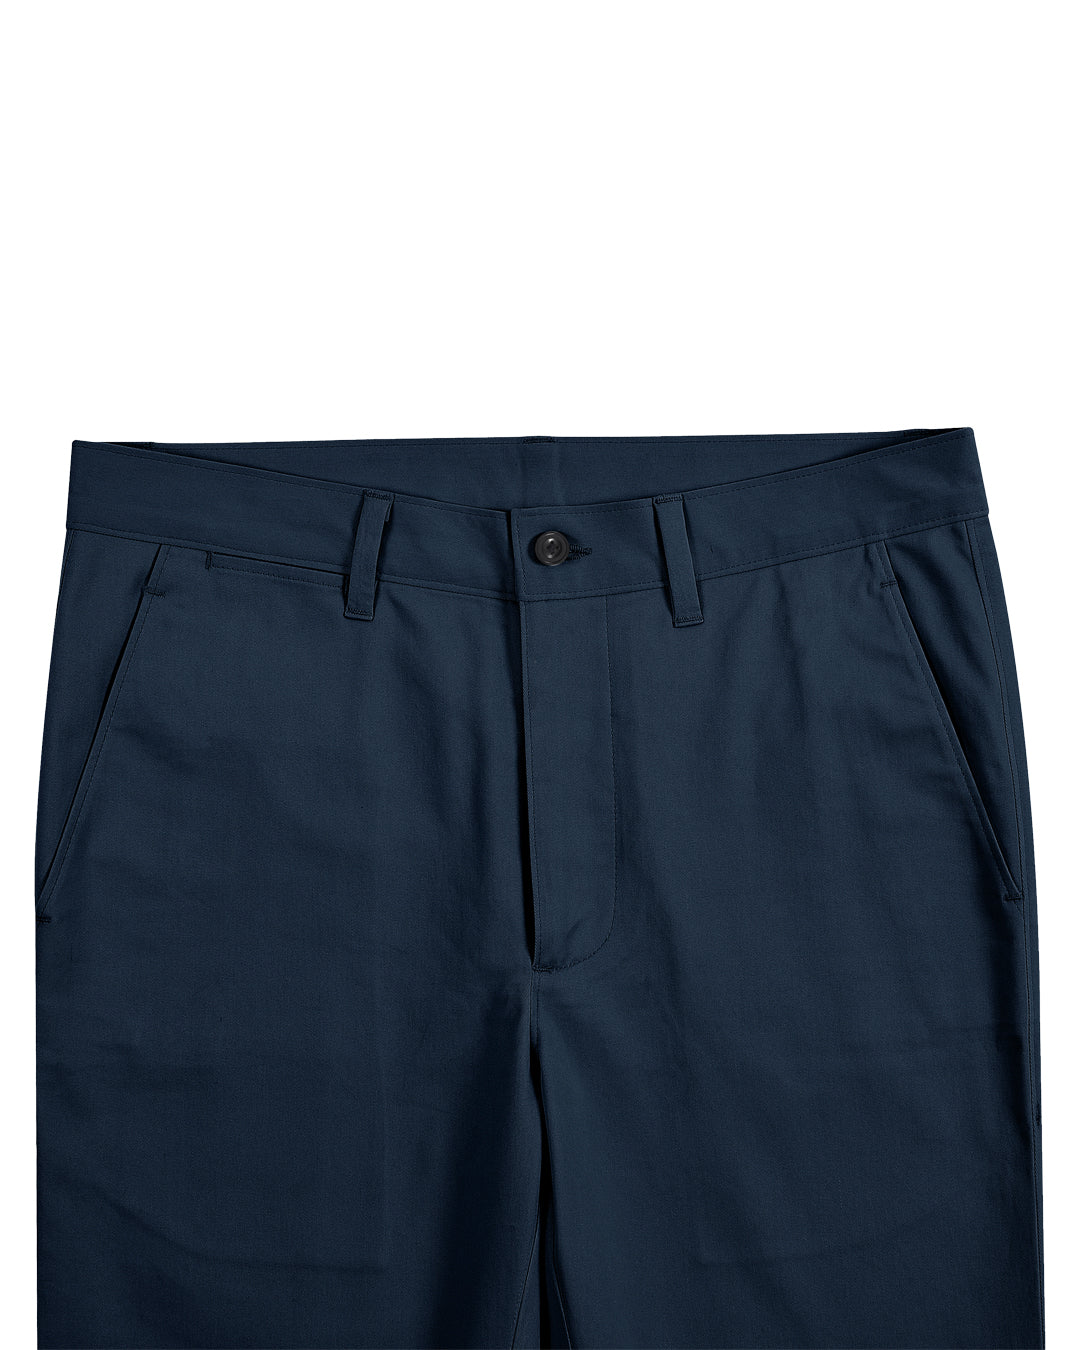 Front view of custom Genoa Chino pants for men by Luxire in ink blue